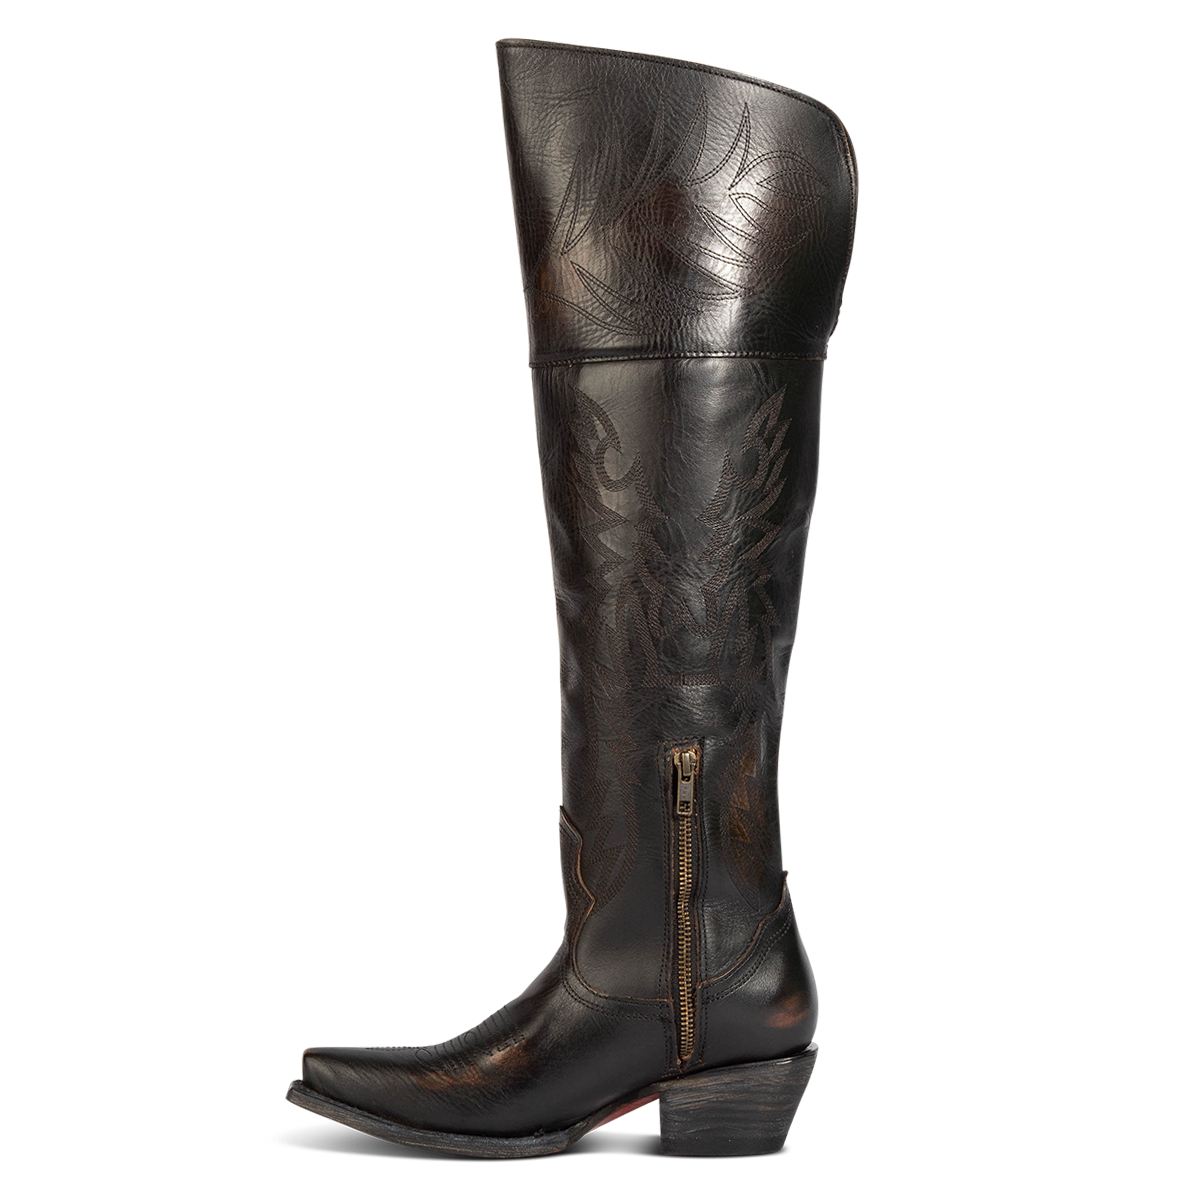 Side view showing inside zipper and western stitch detailing on FREEBIRD women's Wynonna black leather tall boot